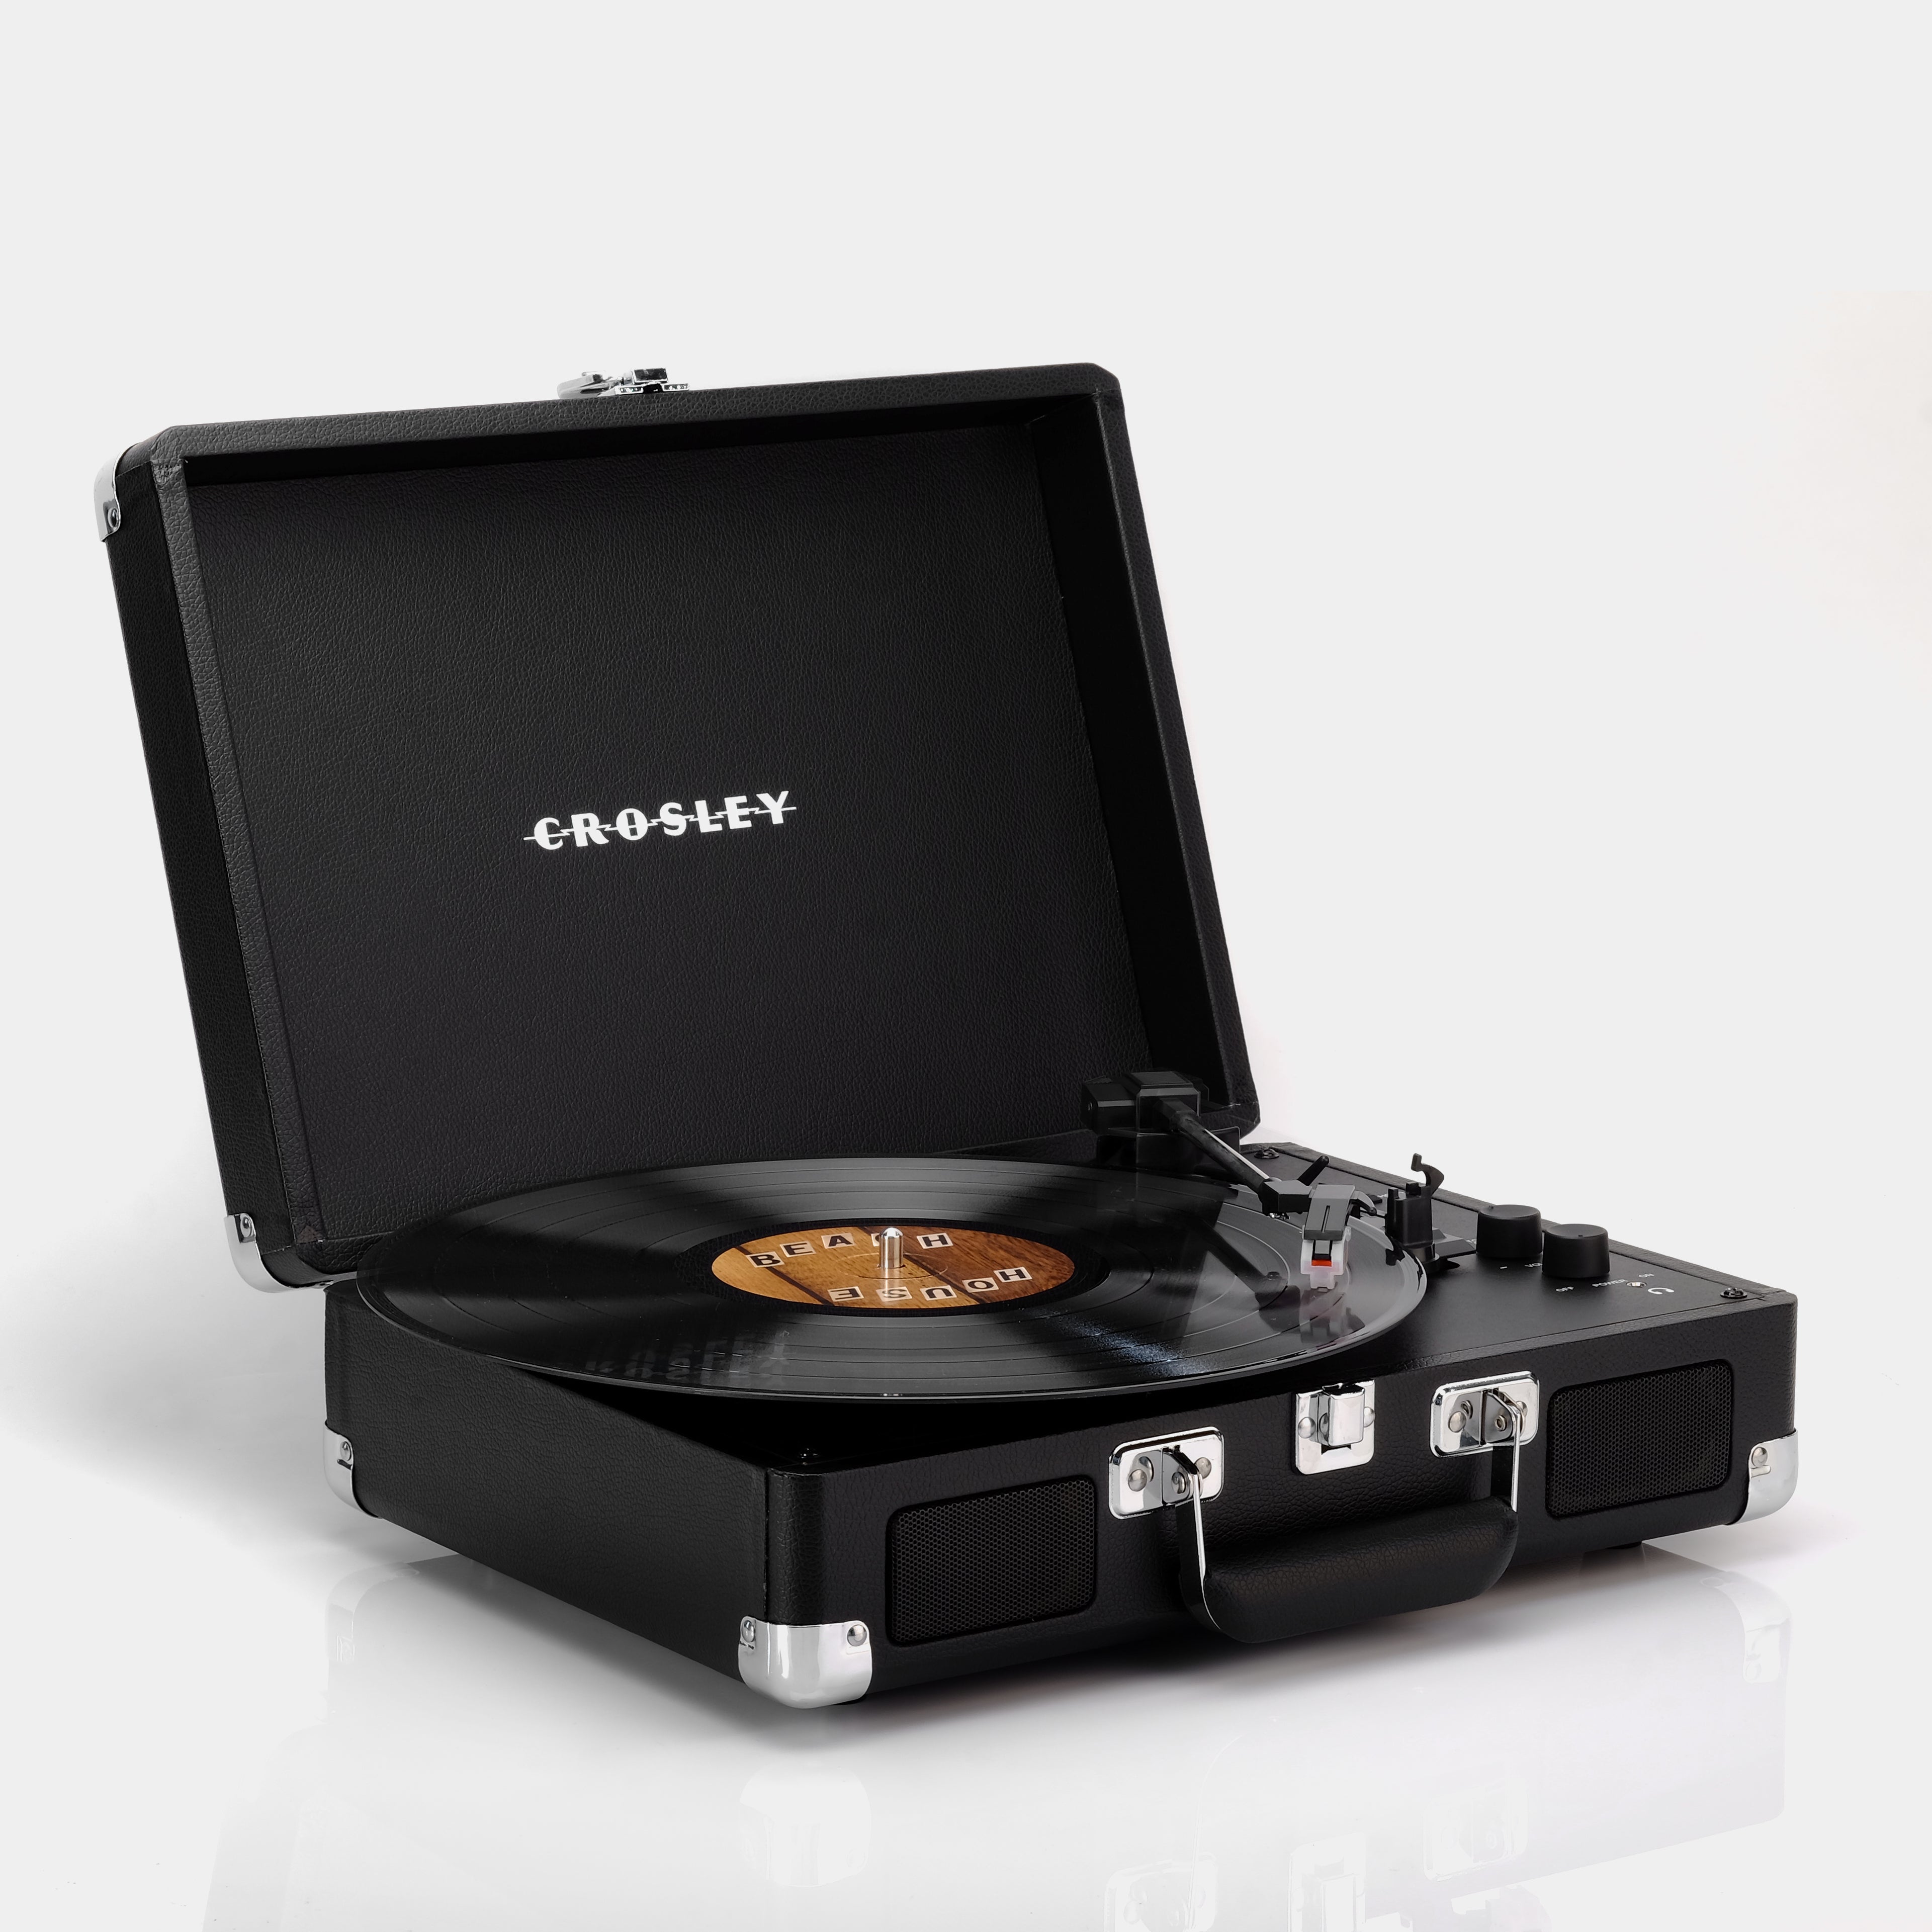 Crosley Cruiser Deluxe Black Portable Turntable with Bluetooth